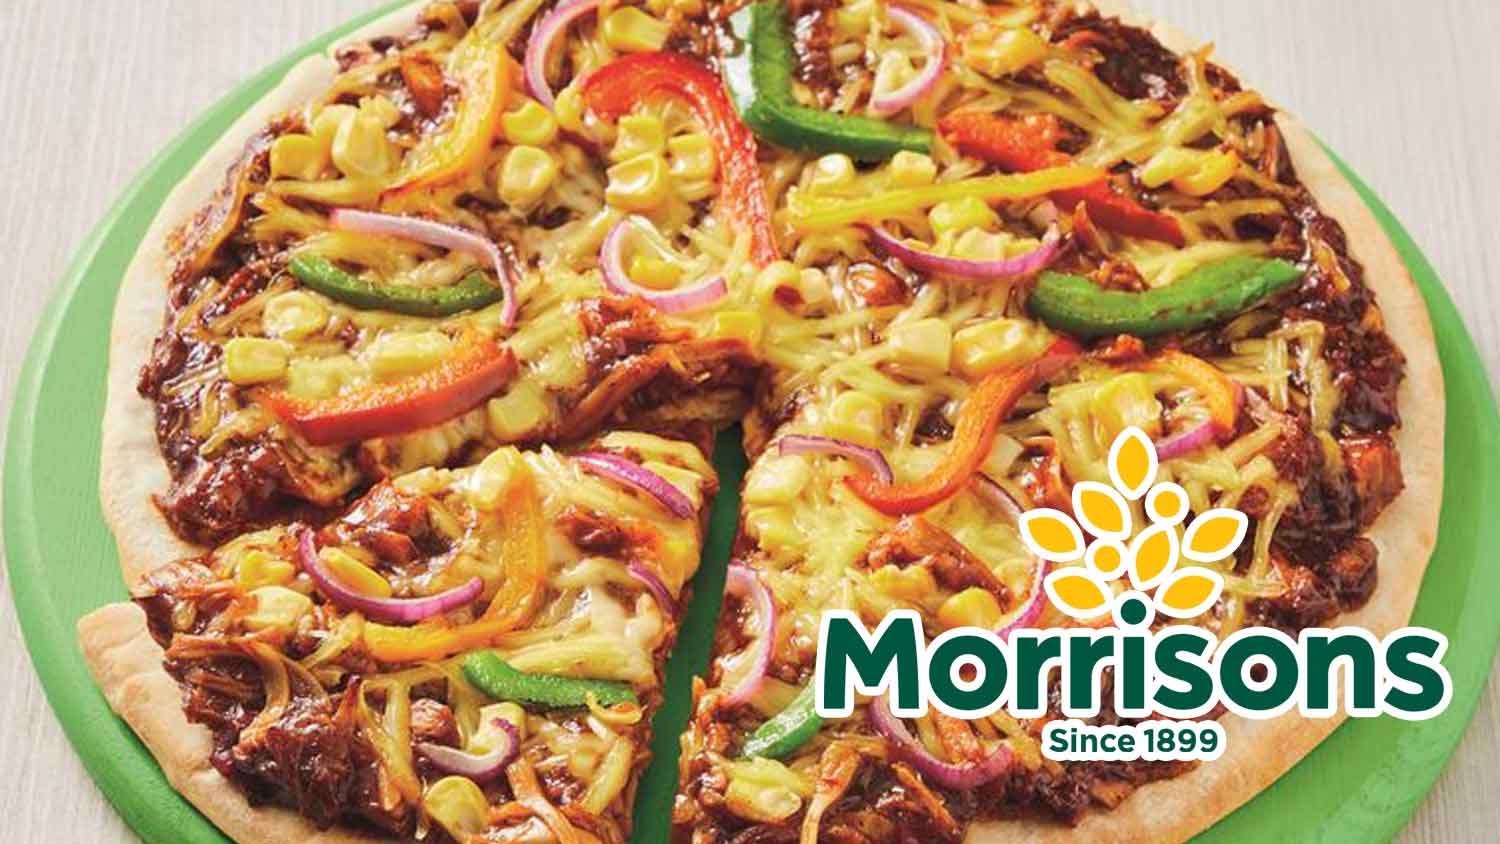 £4 BBQ Pulled Jackfruit Pizza Now at Morrisons